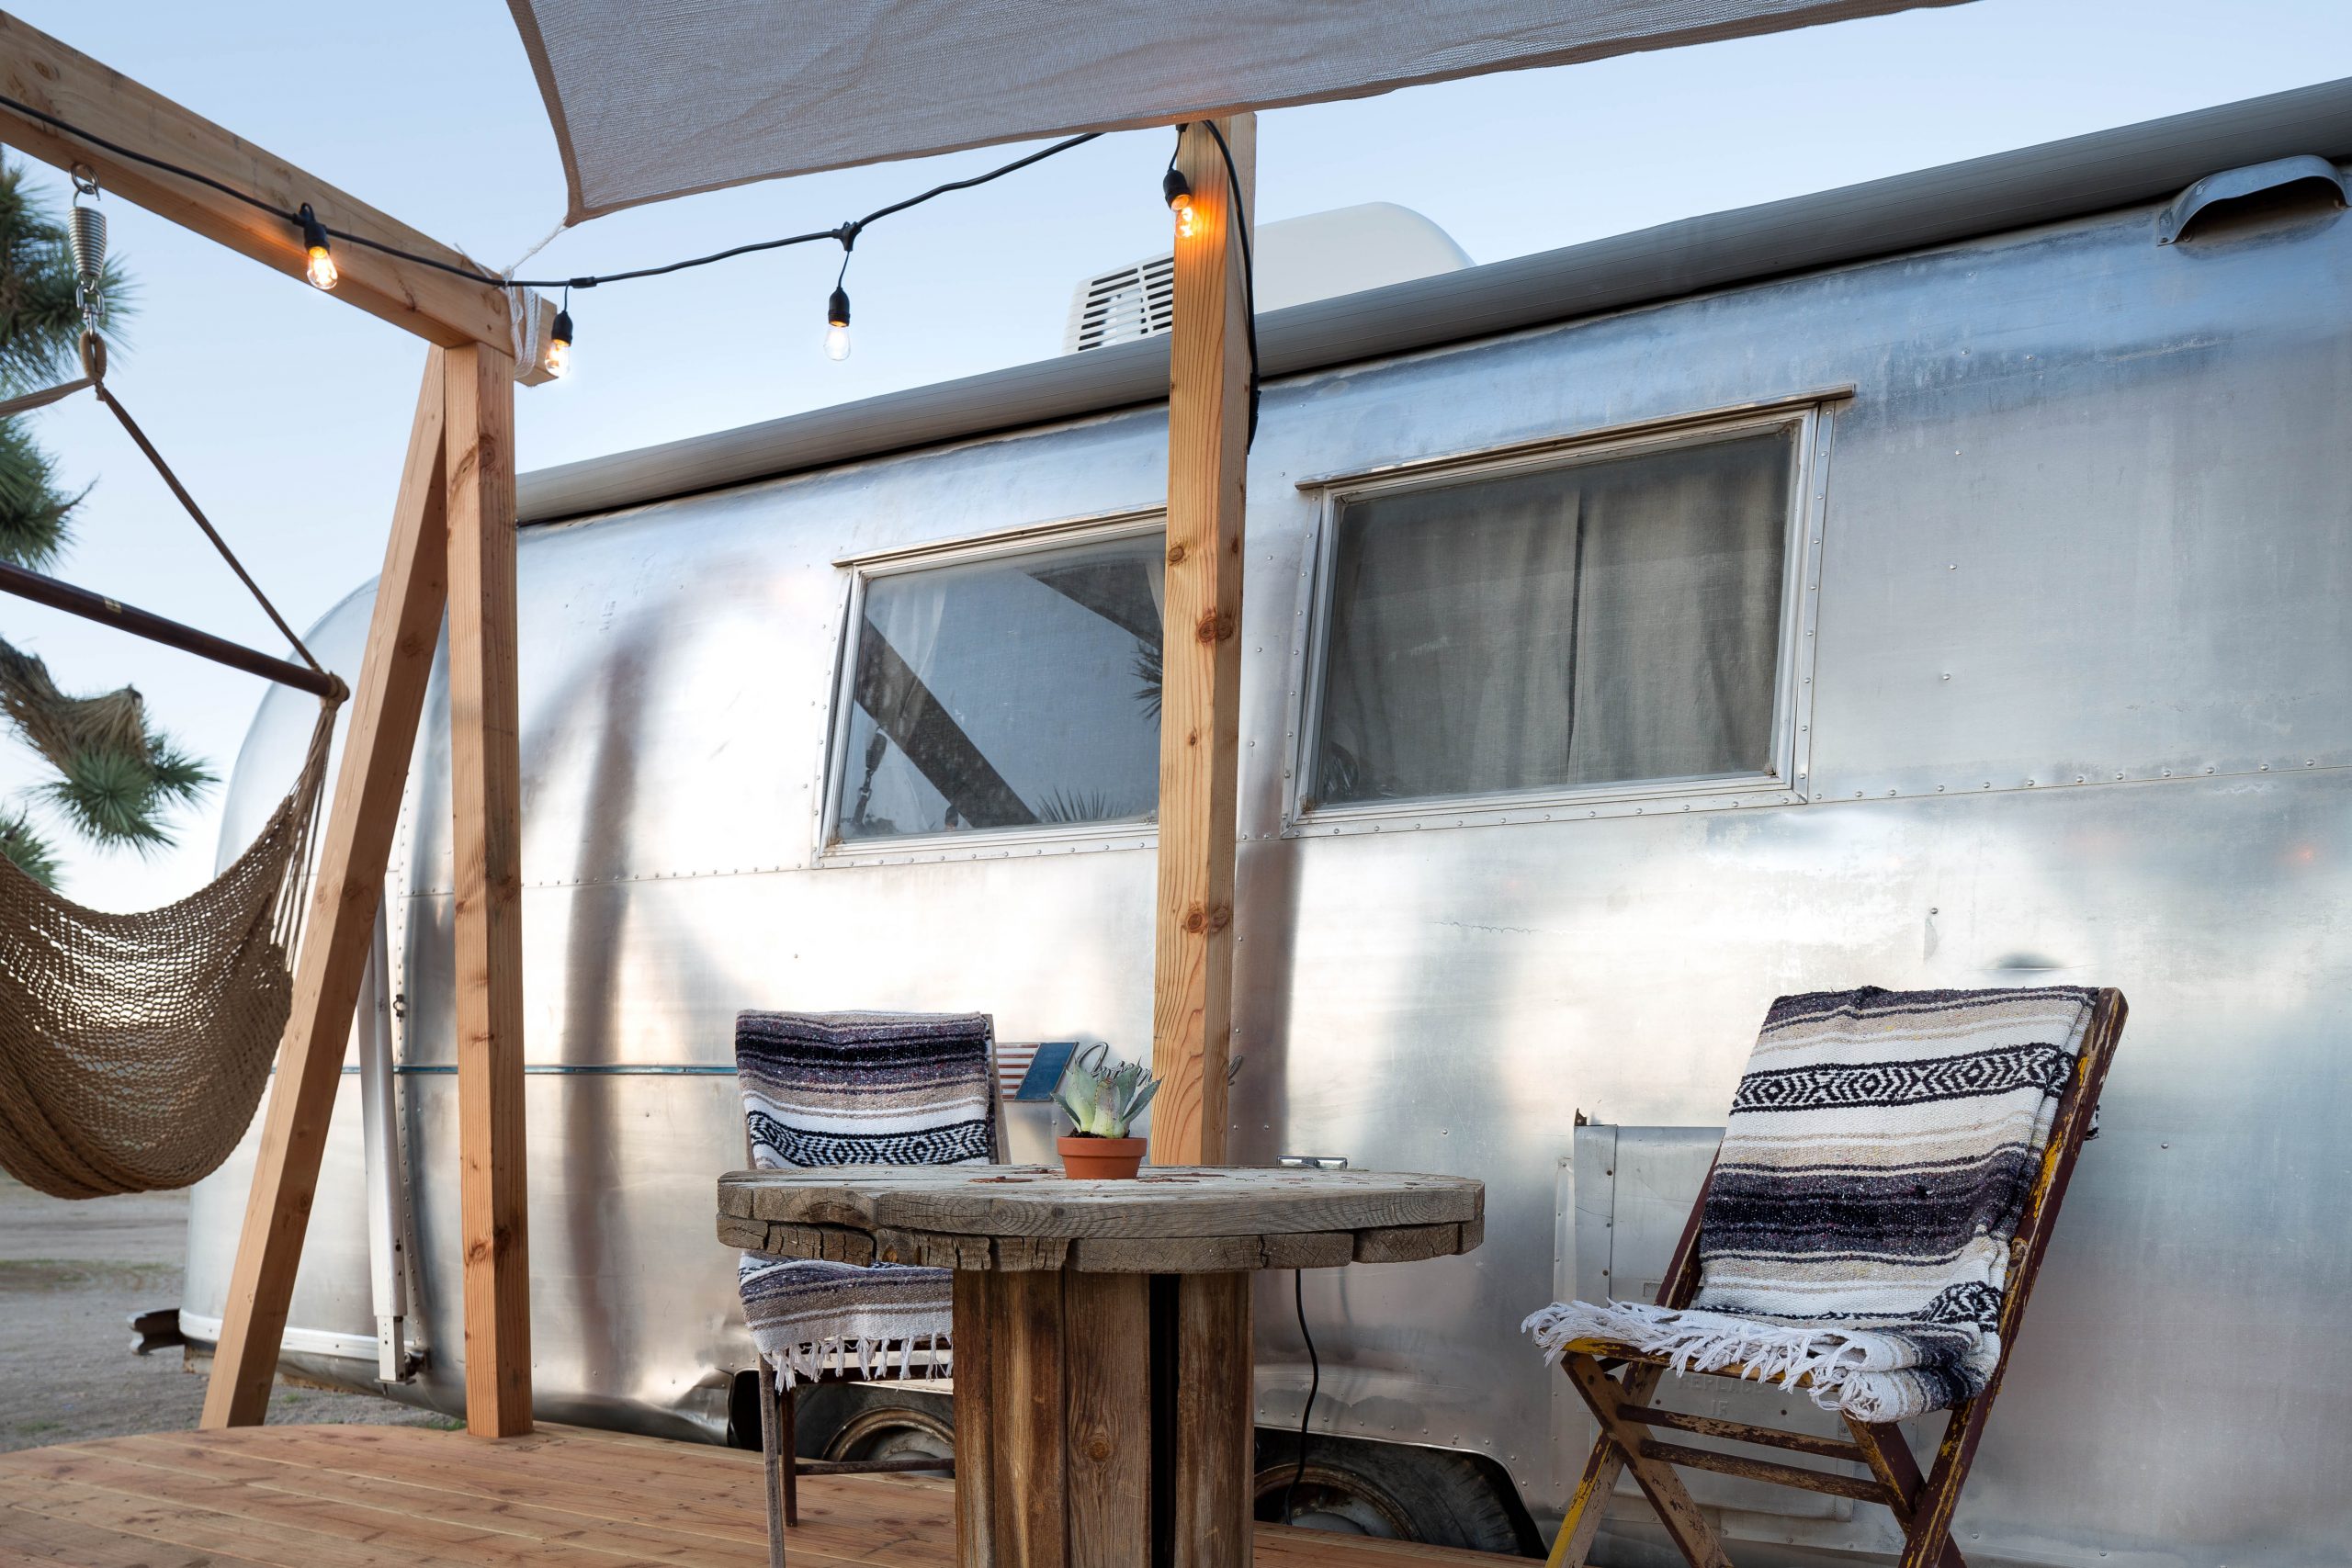 Revived Airstream in Joshua Tree, CA